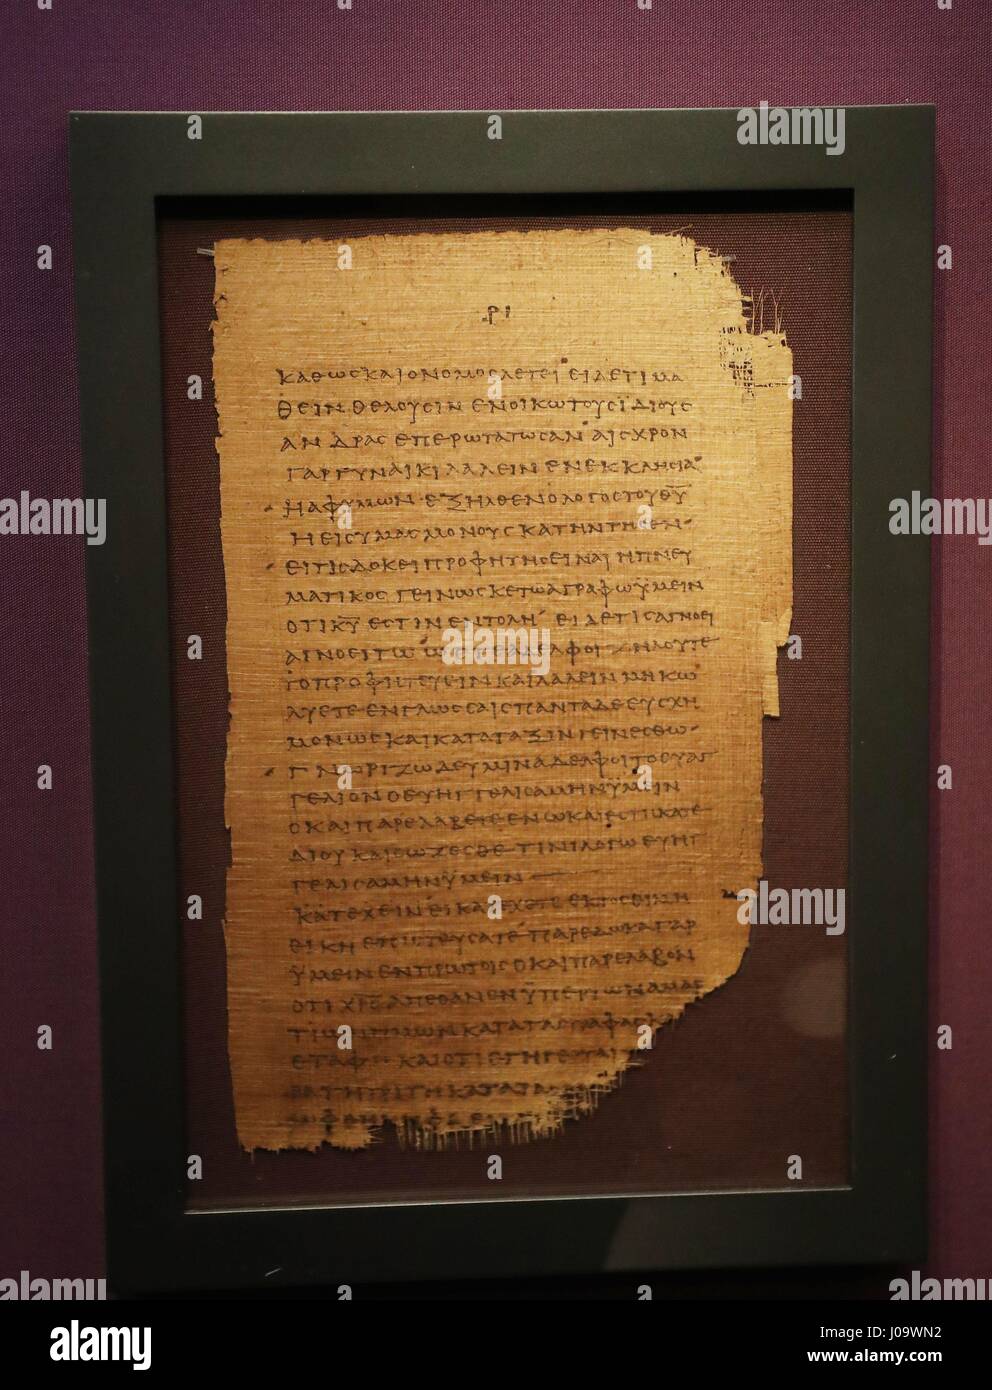 First Corinthians 14:34 - 15:5 of Pauline Epistles on display as some of the oldest surviving biblical manuscripts with a direct link to early Christianity have gone on display at the Chester Beatty library in Dublin. Stock Photo